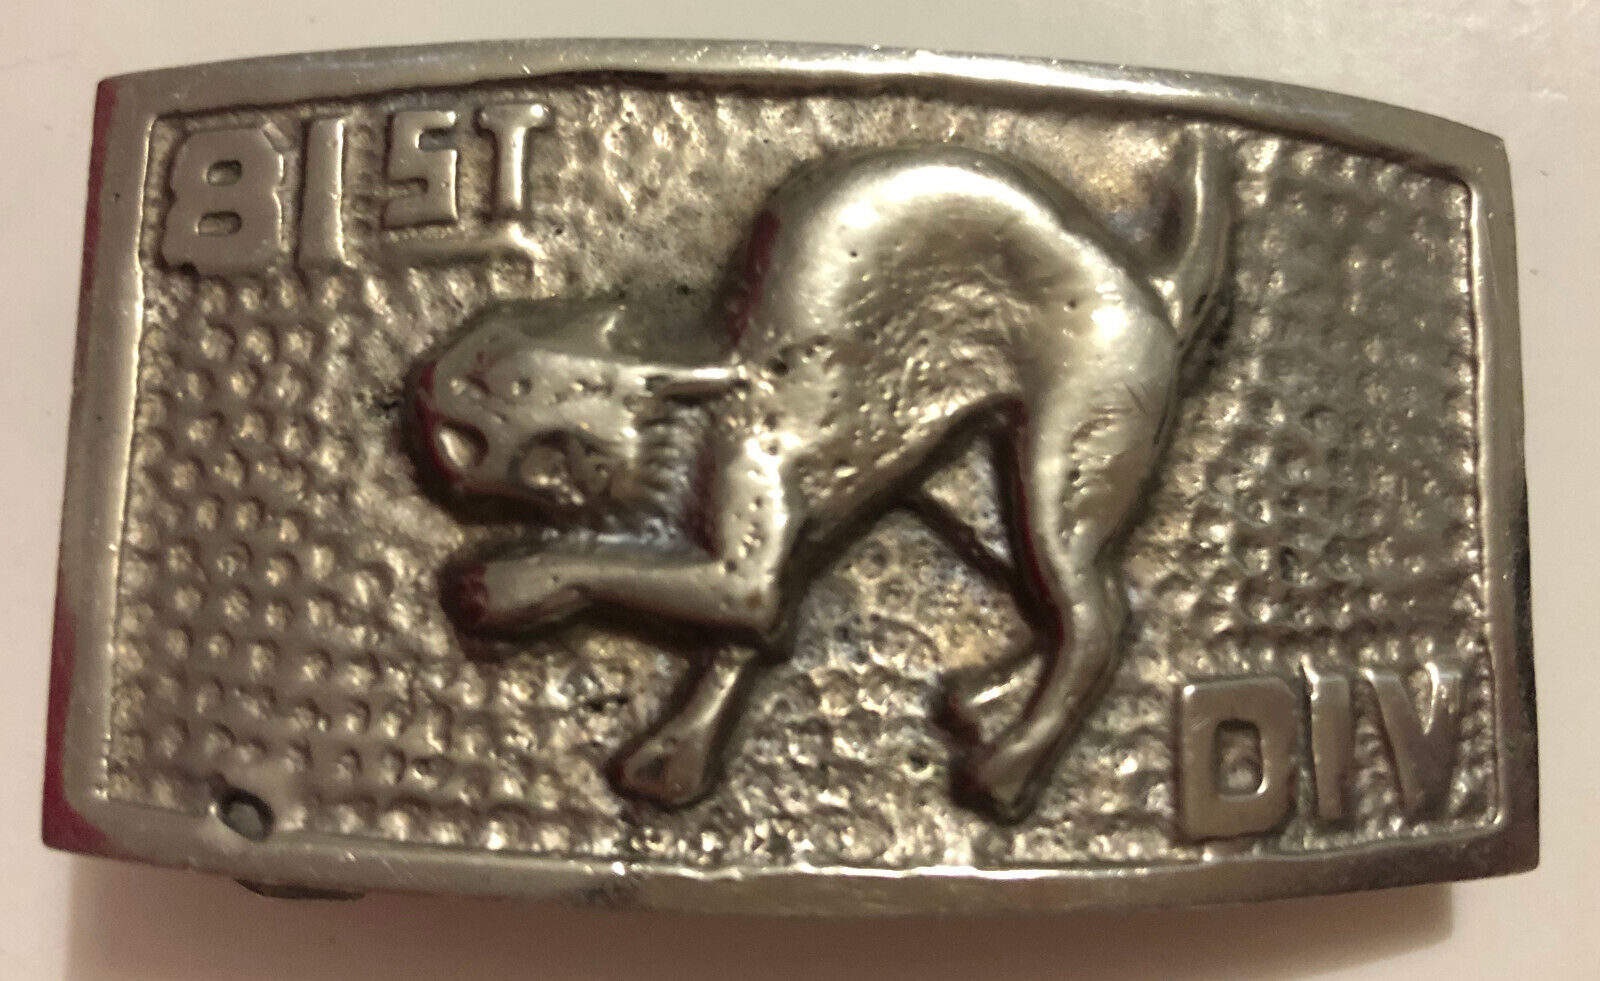 81st Division Wildcat WWI WWII Military Army Cat Belt Buckle Hamlin Vintage 